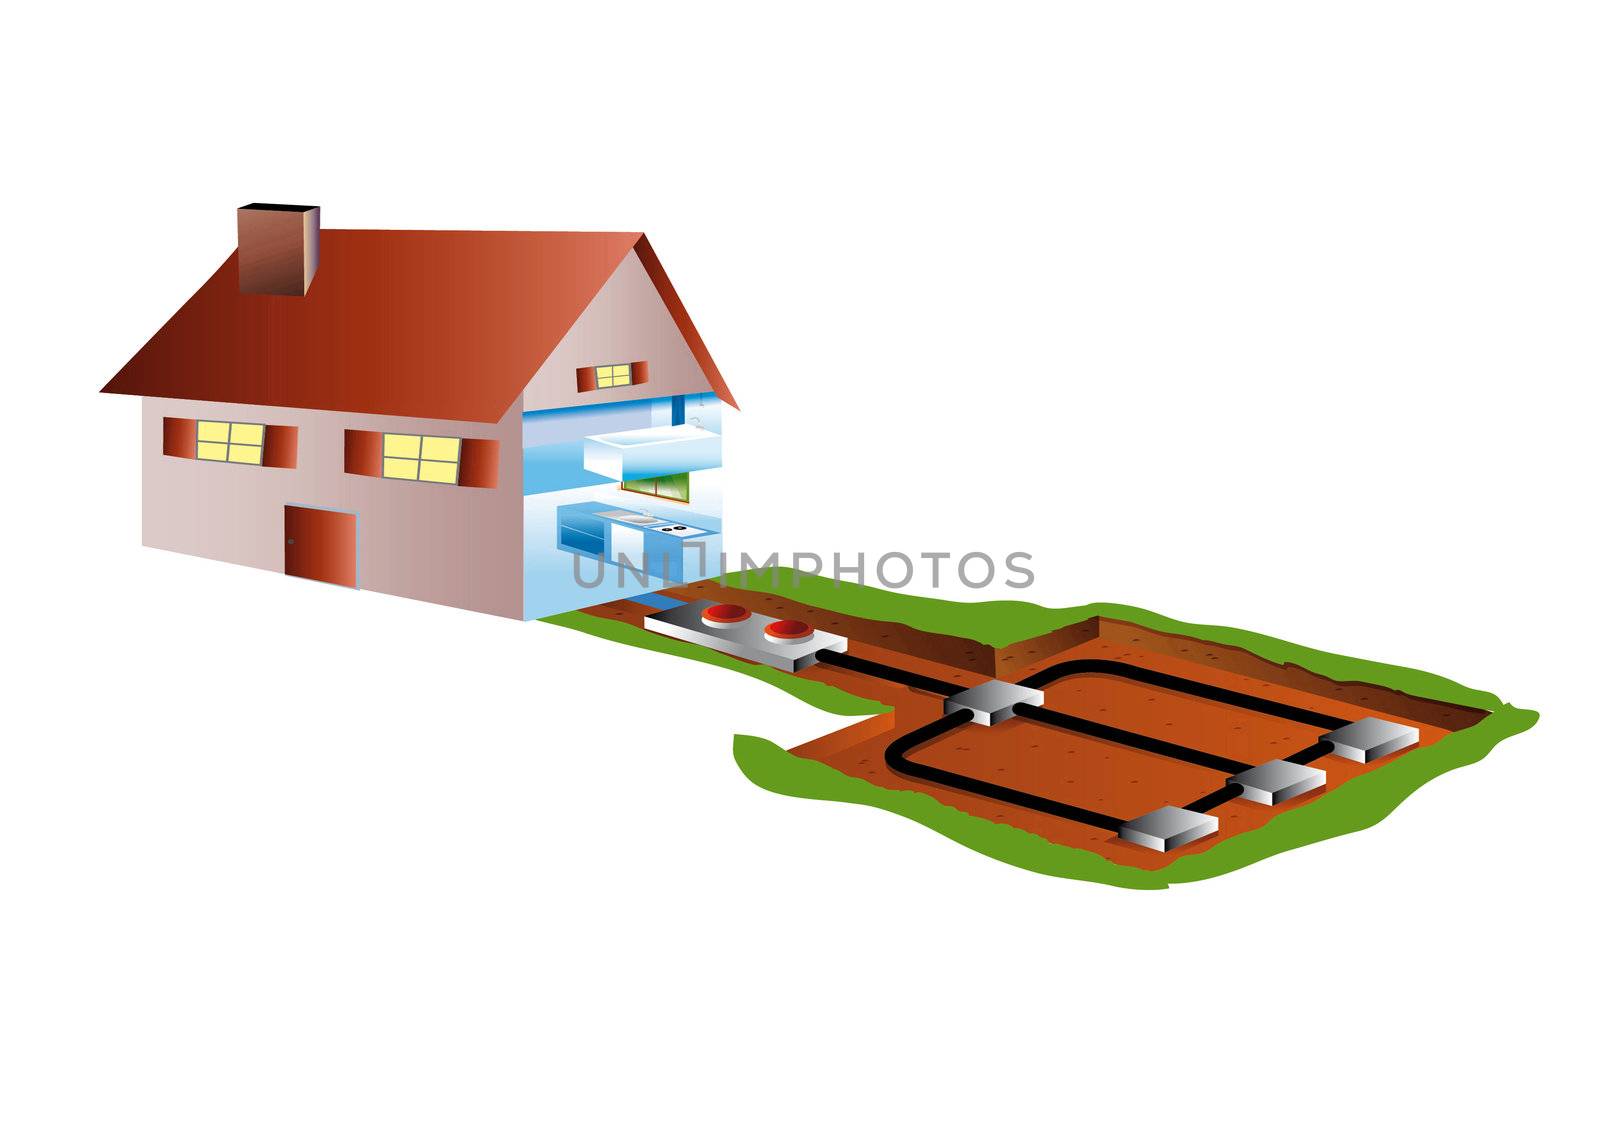 ecological houses with air-conditioning in basement or by geothermics